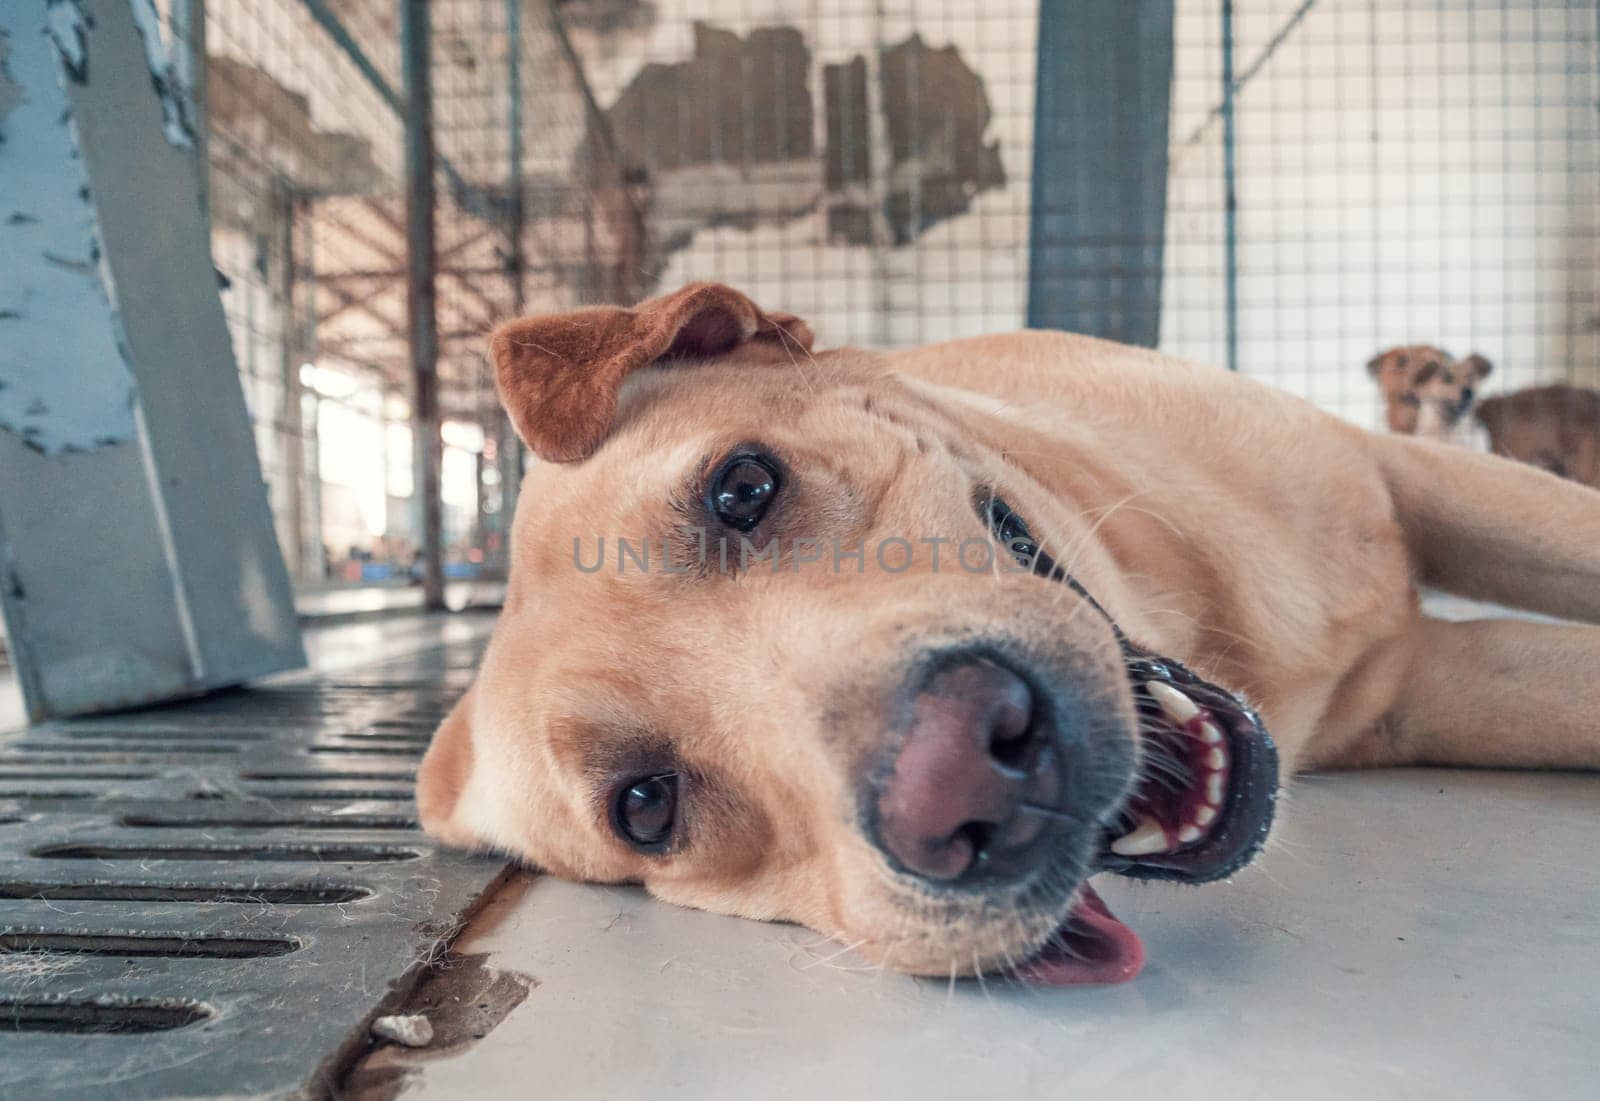 Labrador dog in shelter waiting to be rescued and adopted to new home.